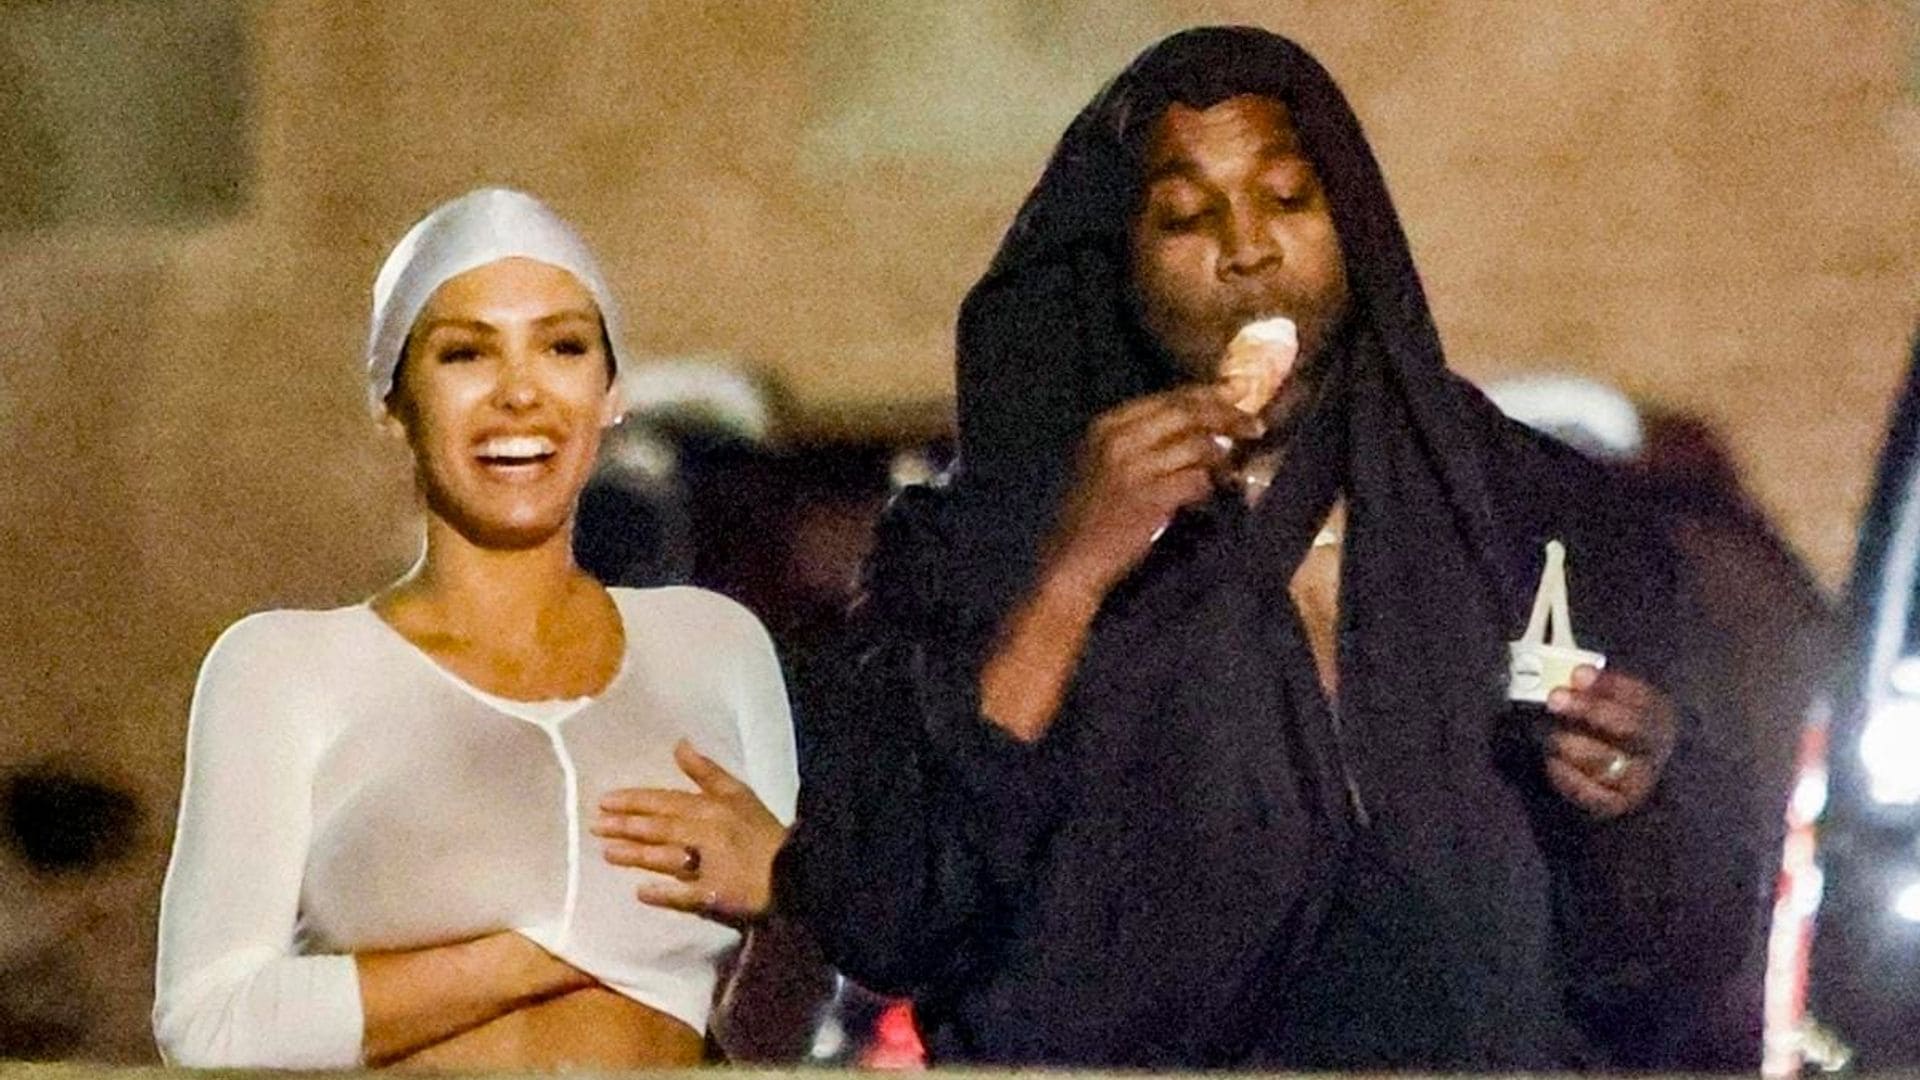 Bianca Censori and Kanye West enjoy a barefoot gelato date in Italy